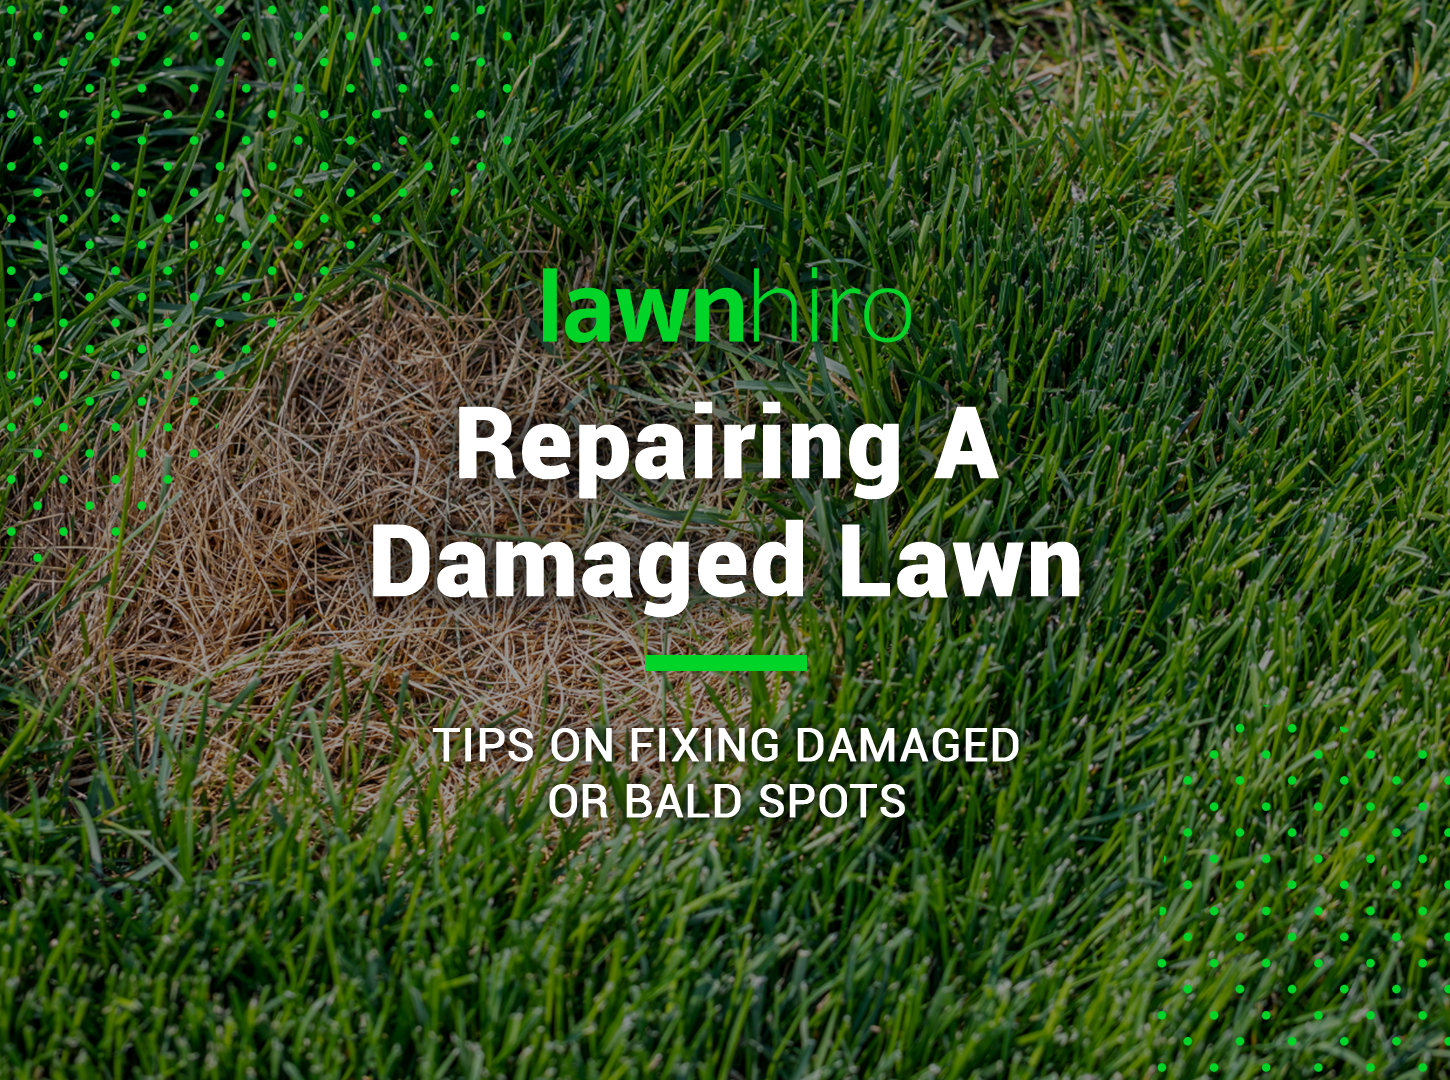 Featured image for “Repairing A Damaged Lawn: Tips on Fixing Damaged or Bald Spots”